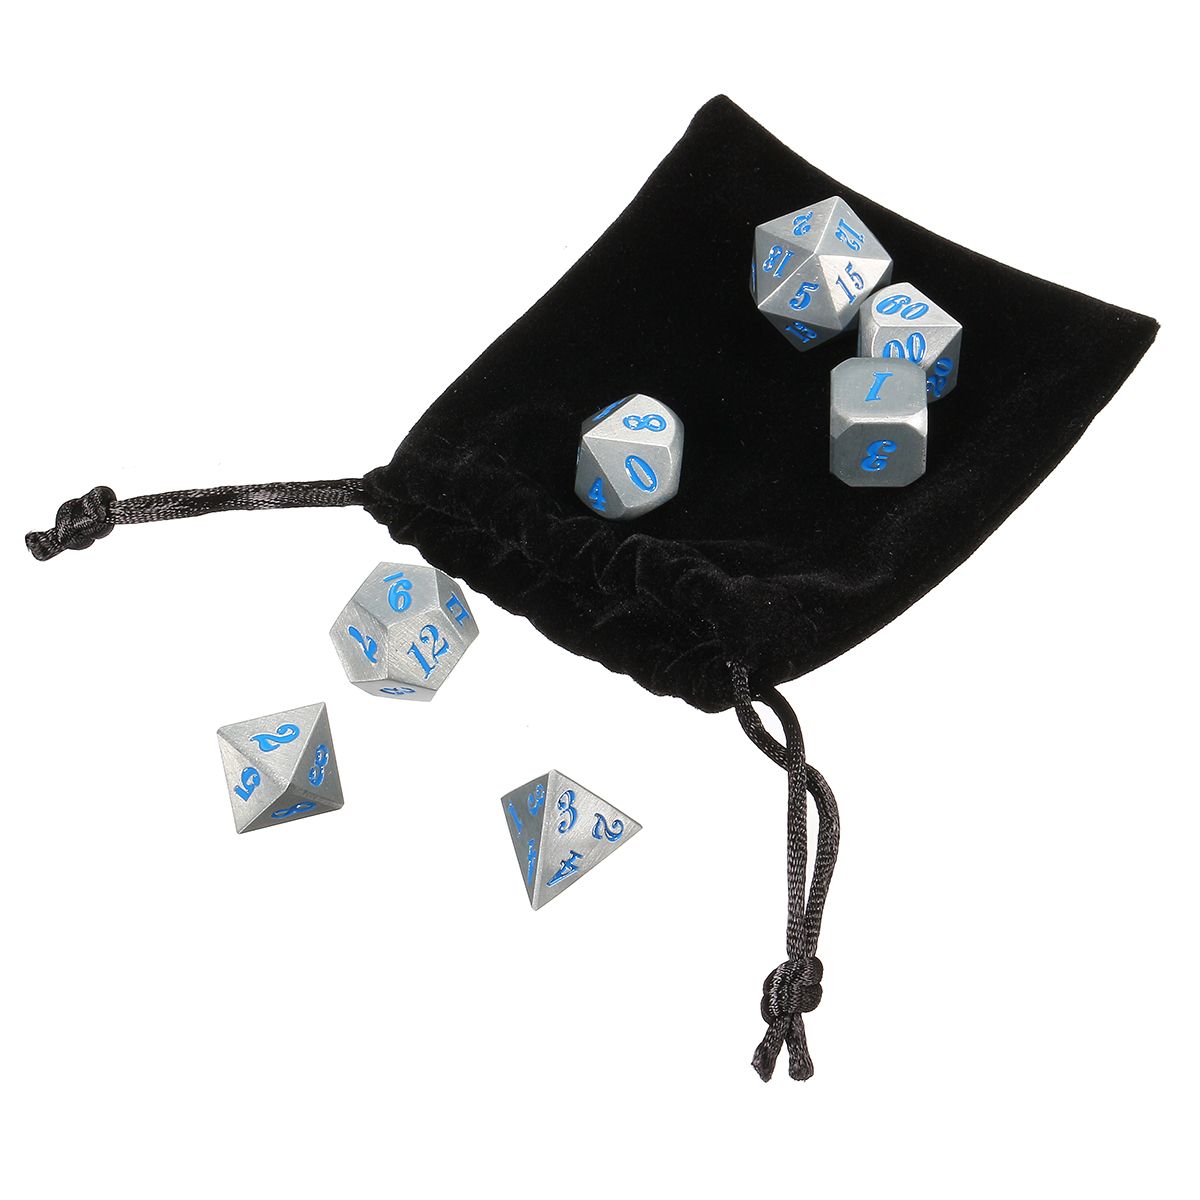 7Pc-Solid-Metal-Heavy-Dice-Set-Polyhedral-Dices-Role-Playing-Games-Dice-Gadget-RPG-1391316